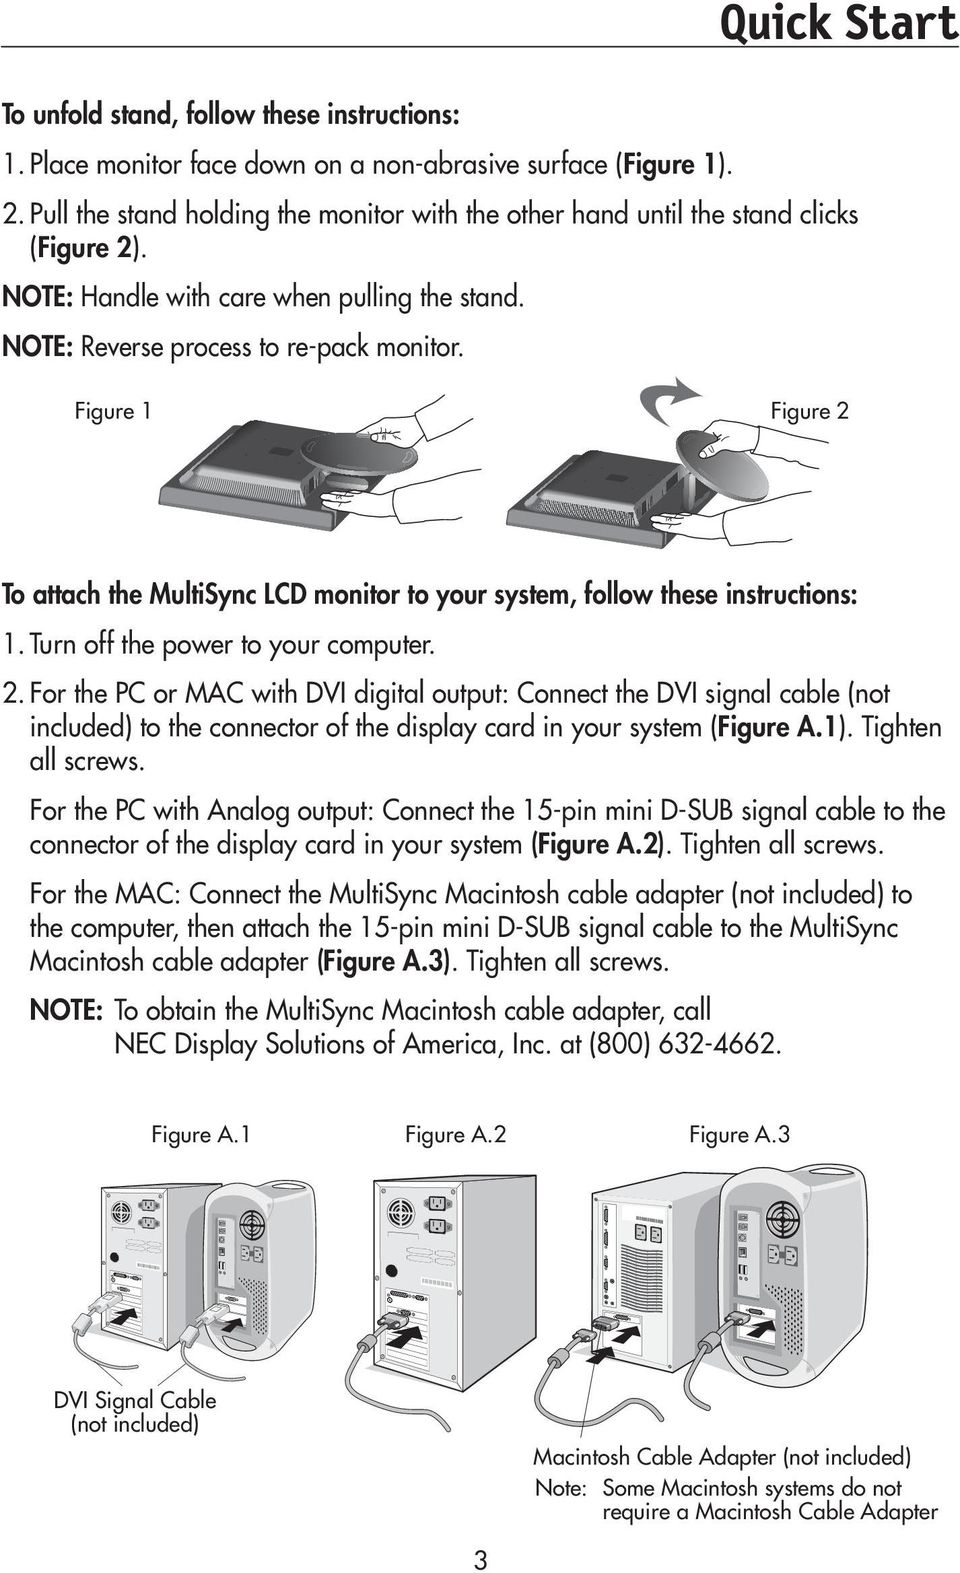 Figure 1 Figure 2 To attach the MultiSync LCD monitor to your system, follow these instructions: 1. Turn off the power to your computer. 2. For the PC or MAC with DVI digital output: Connect the DVI signal cable (not included) to the connector of the display card in your system (Figure A.